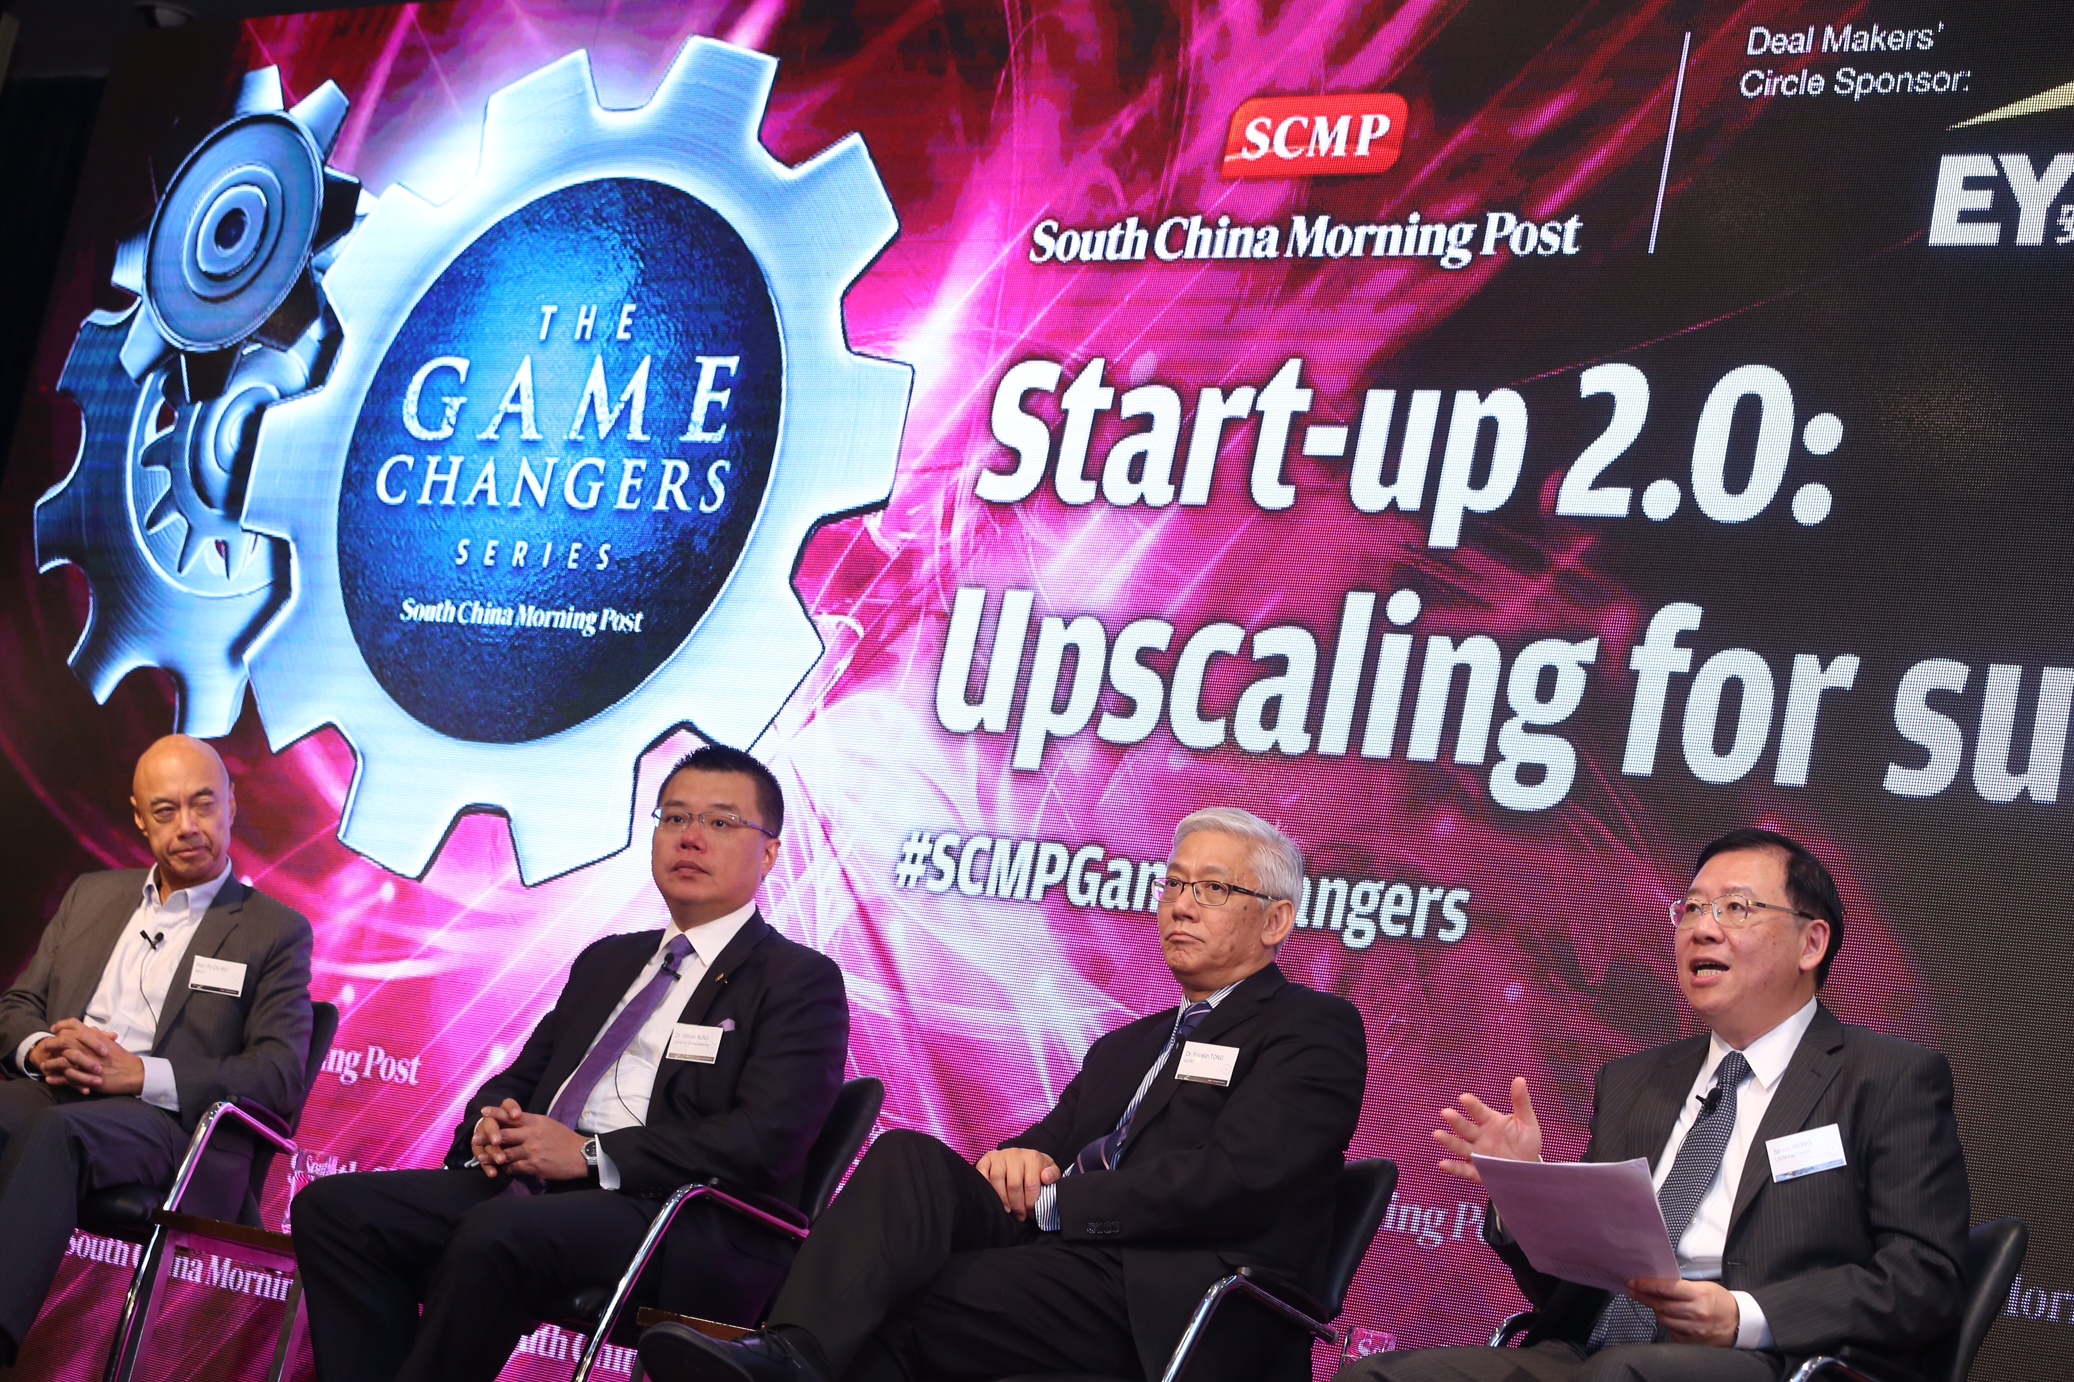 Speaking at the SCMP Game Changers forum, panelists Wu Po-chi of HKUST, Witman Hung of the Hong Kong Shenzhen Qianhai Authority, ASTRI's Franklin Tong, and Simon Wong of the LSCM R&D Centre discuss smart cities. Photo: Cheng Kok-yin